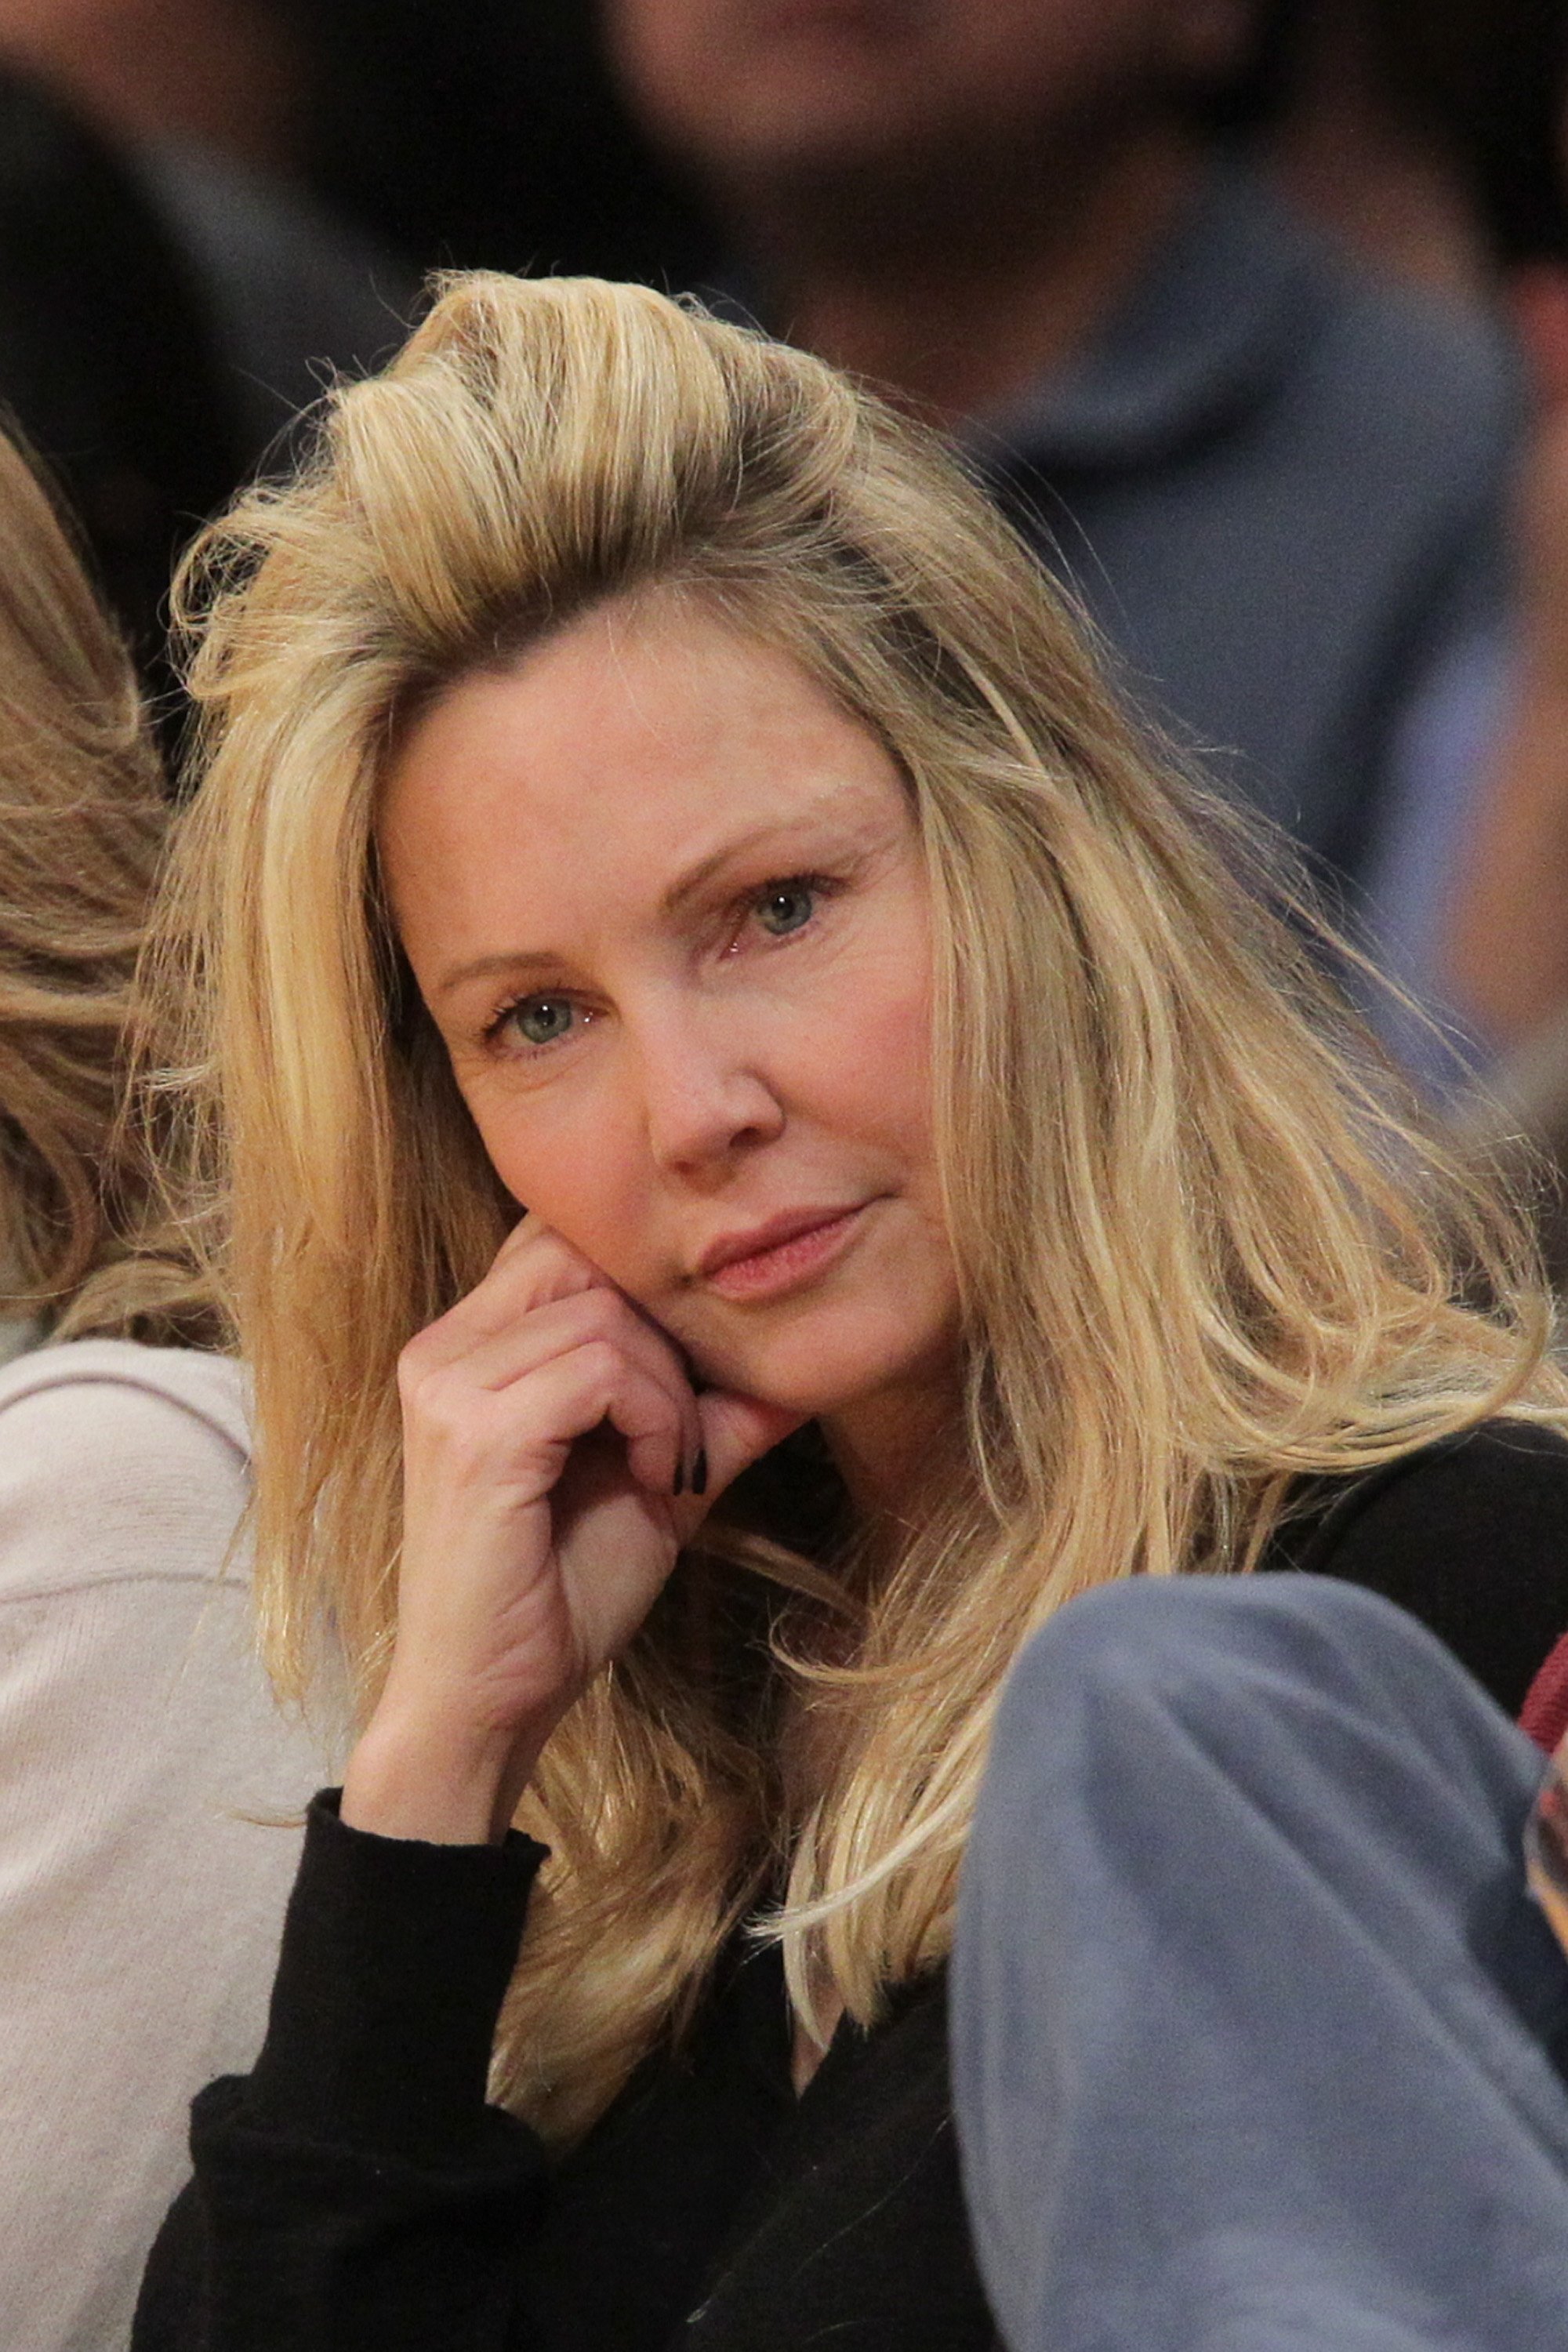 Heather Locklear at an NBA match between the Phoenix Suns and the Los Angeles Lakers in 2012 | Photo: Getty Images